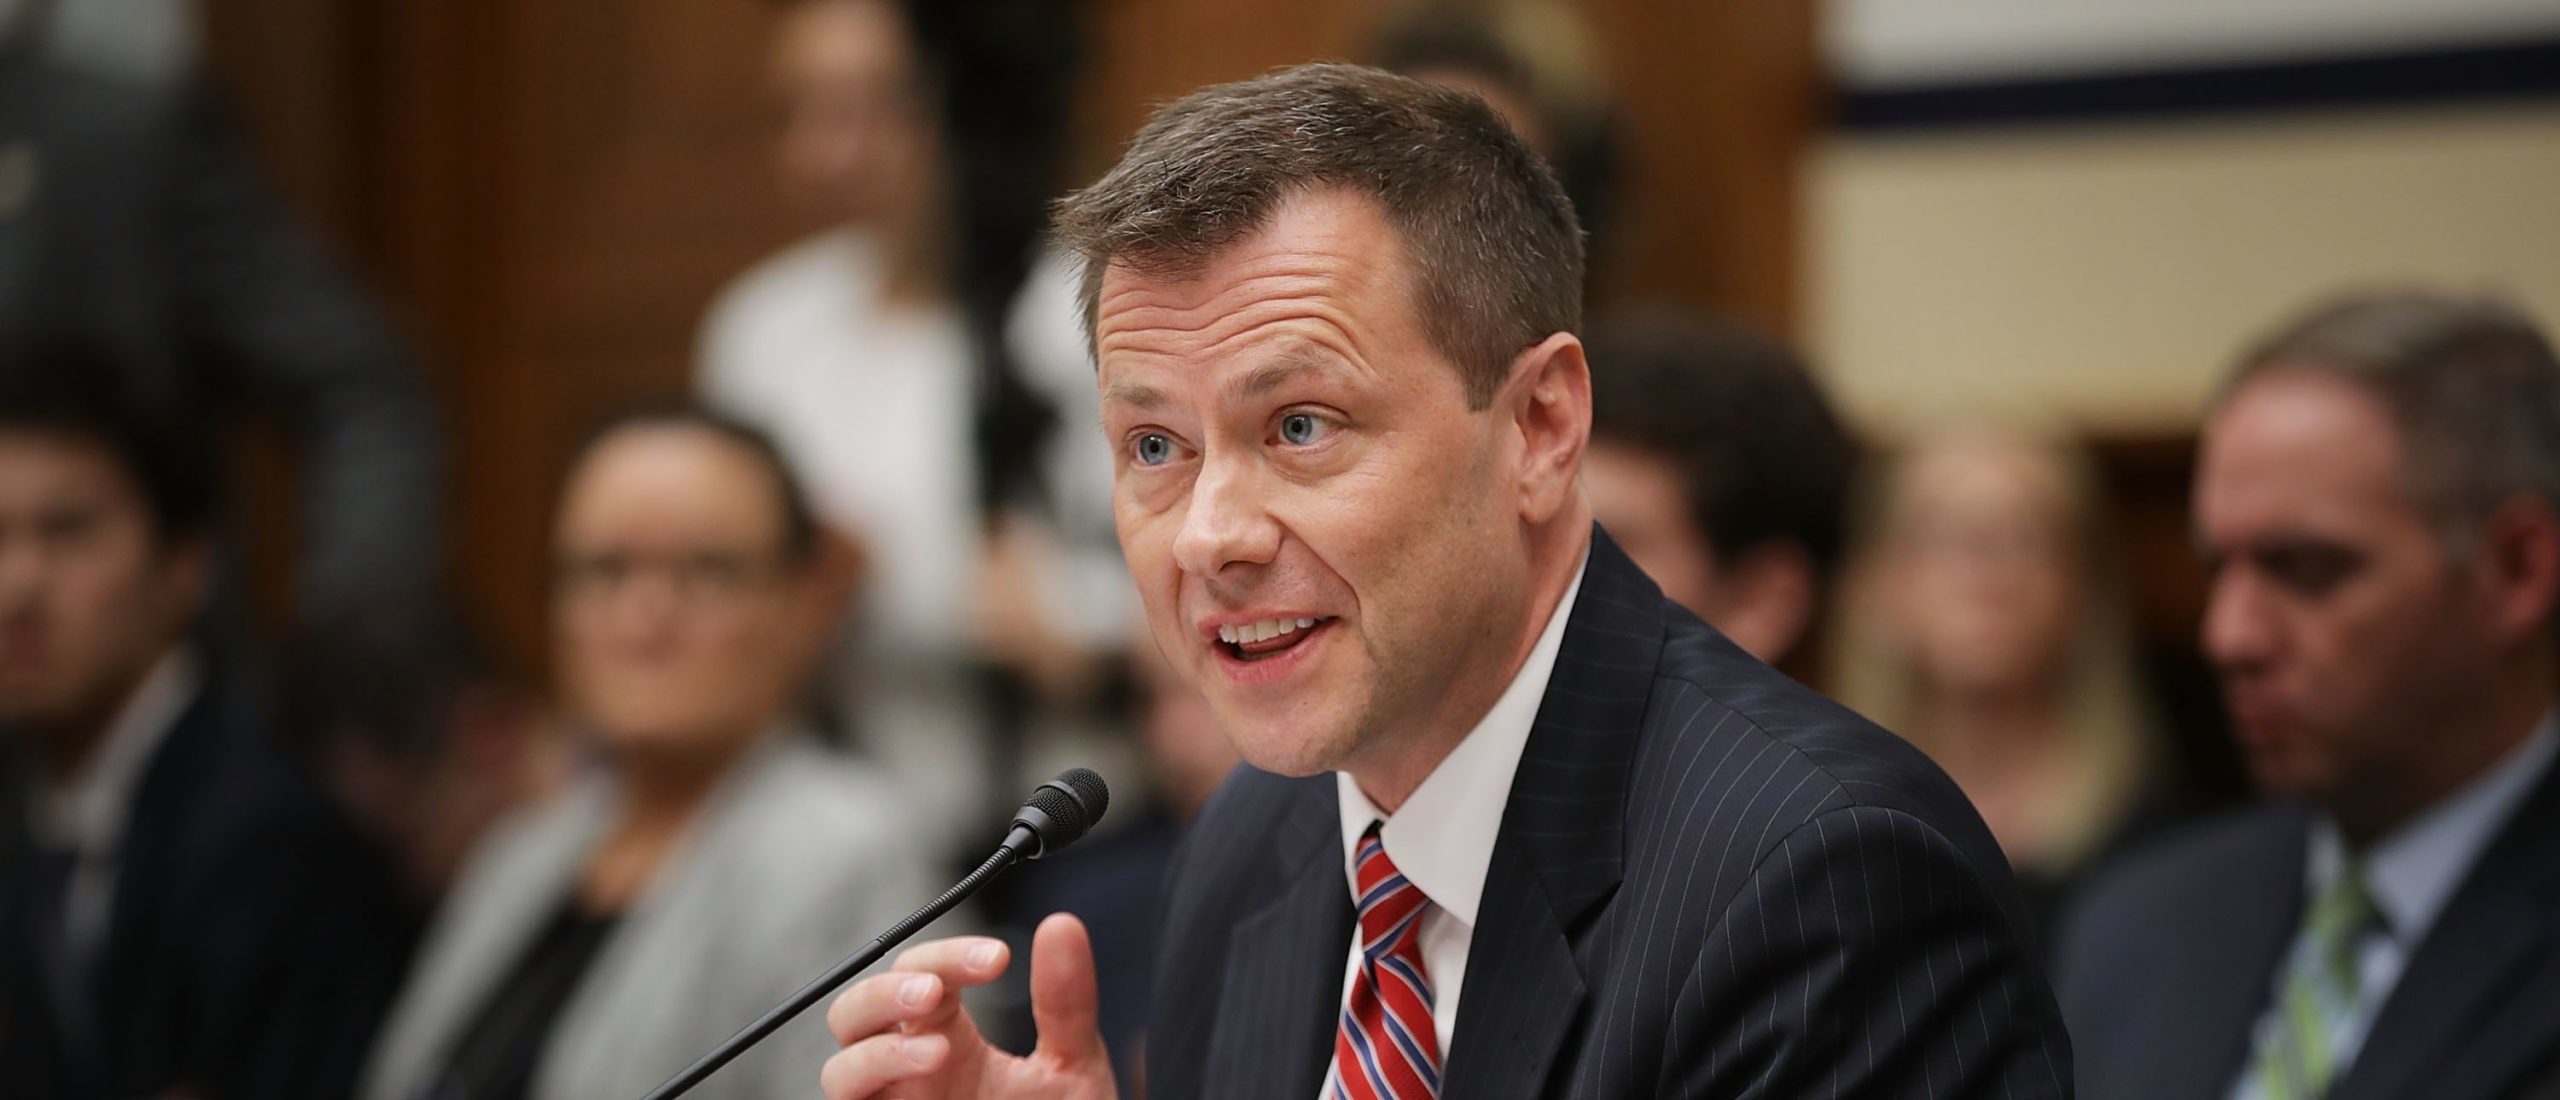 Deputy Assistant FBI Director Peter Strzok testifies before a joint committee hearing of the House Judiciary and Oversight and Government Reform committees in the Rayburn House Office Building on Capitol Hill July 12, 2018 in Washington, DC. While involved in the probe into Hillary ClintonÕs use of a private email server in 2016, Strzok exchanged text messages with FBI attorney Lisa Page that were critical of Trump. After learning about the messages, Mueller removed Strzok from his investigation into whether the Trump campaign colluded with Russia to win the 2016 presidential election. (Photo by Chip Somodevilla/Getty Images)